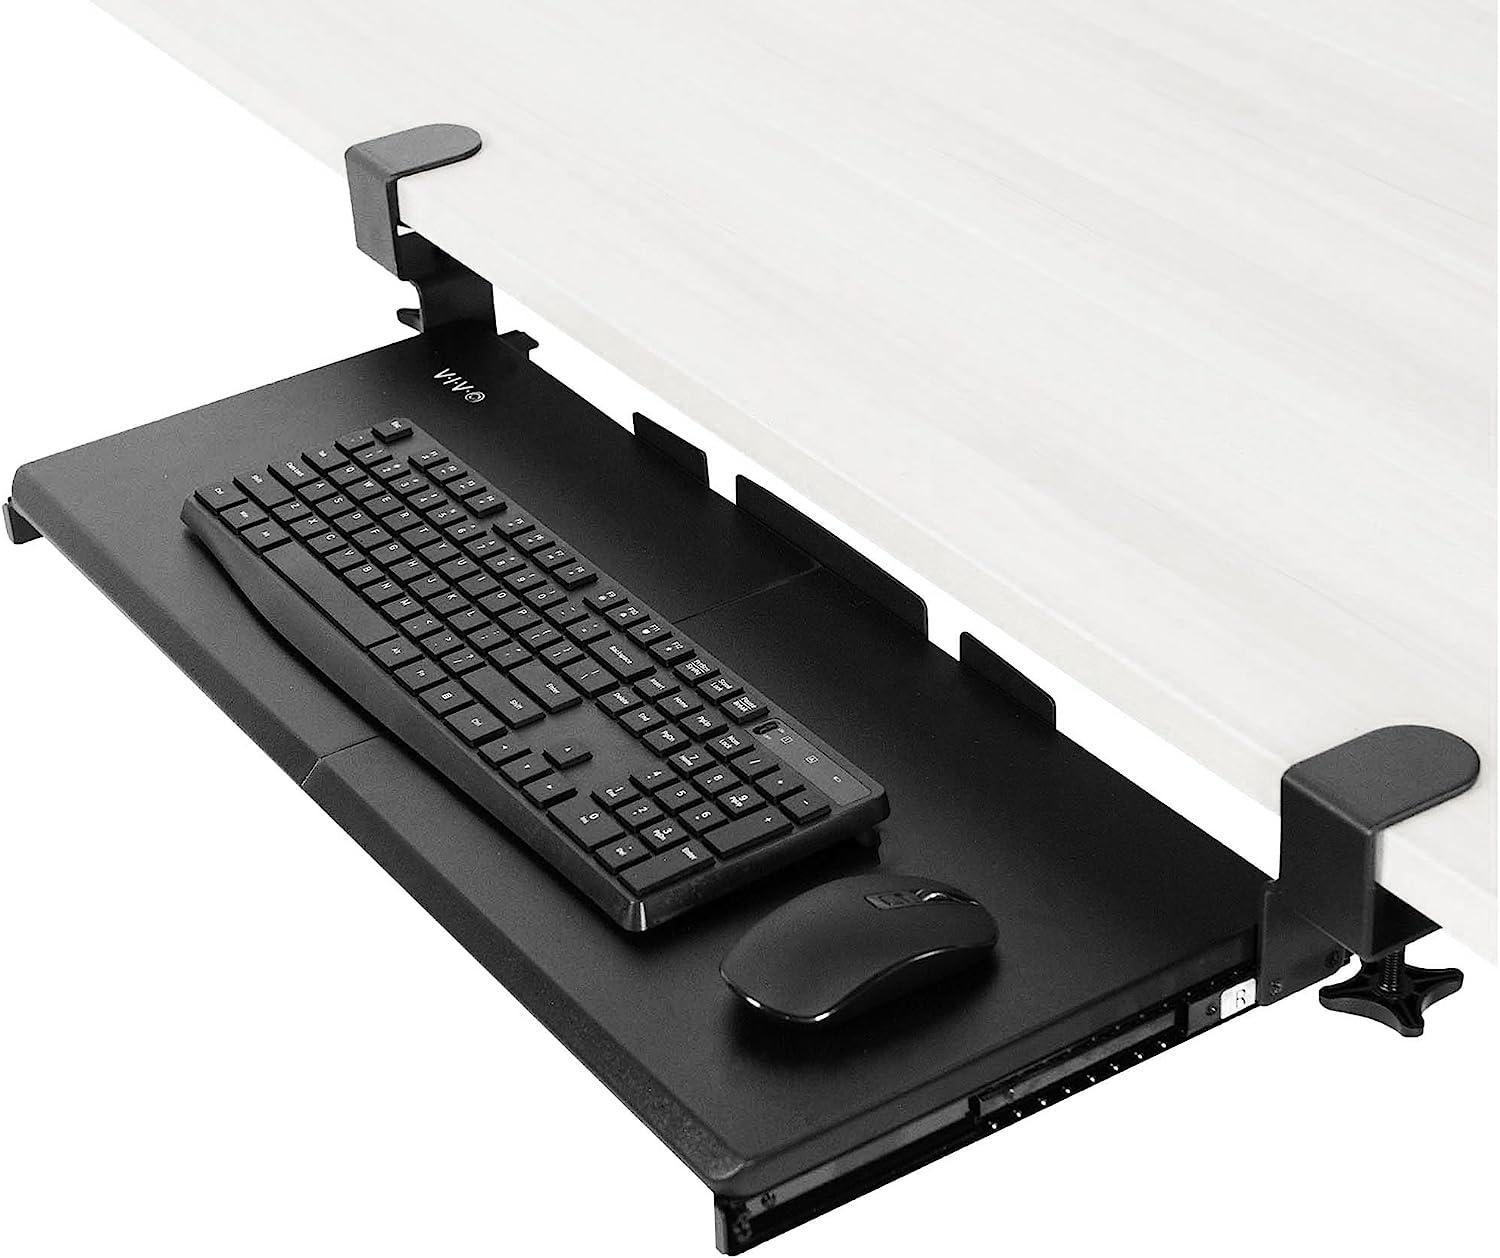 vivo large keyboard tray under desk pull out with extra sturdy c clamp mount system  vivo b07hfdjcsl